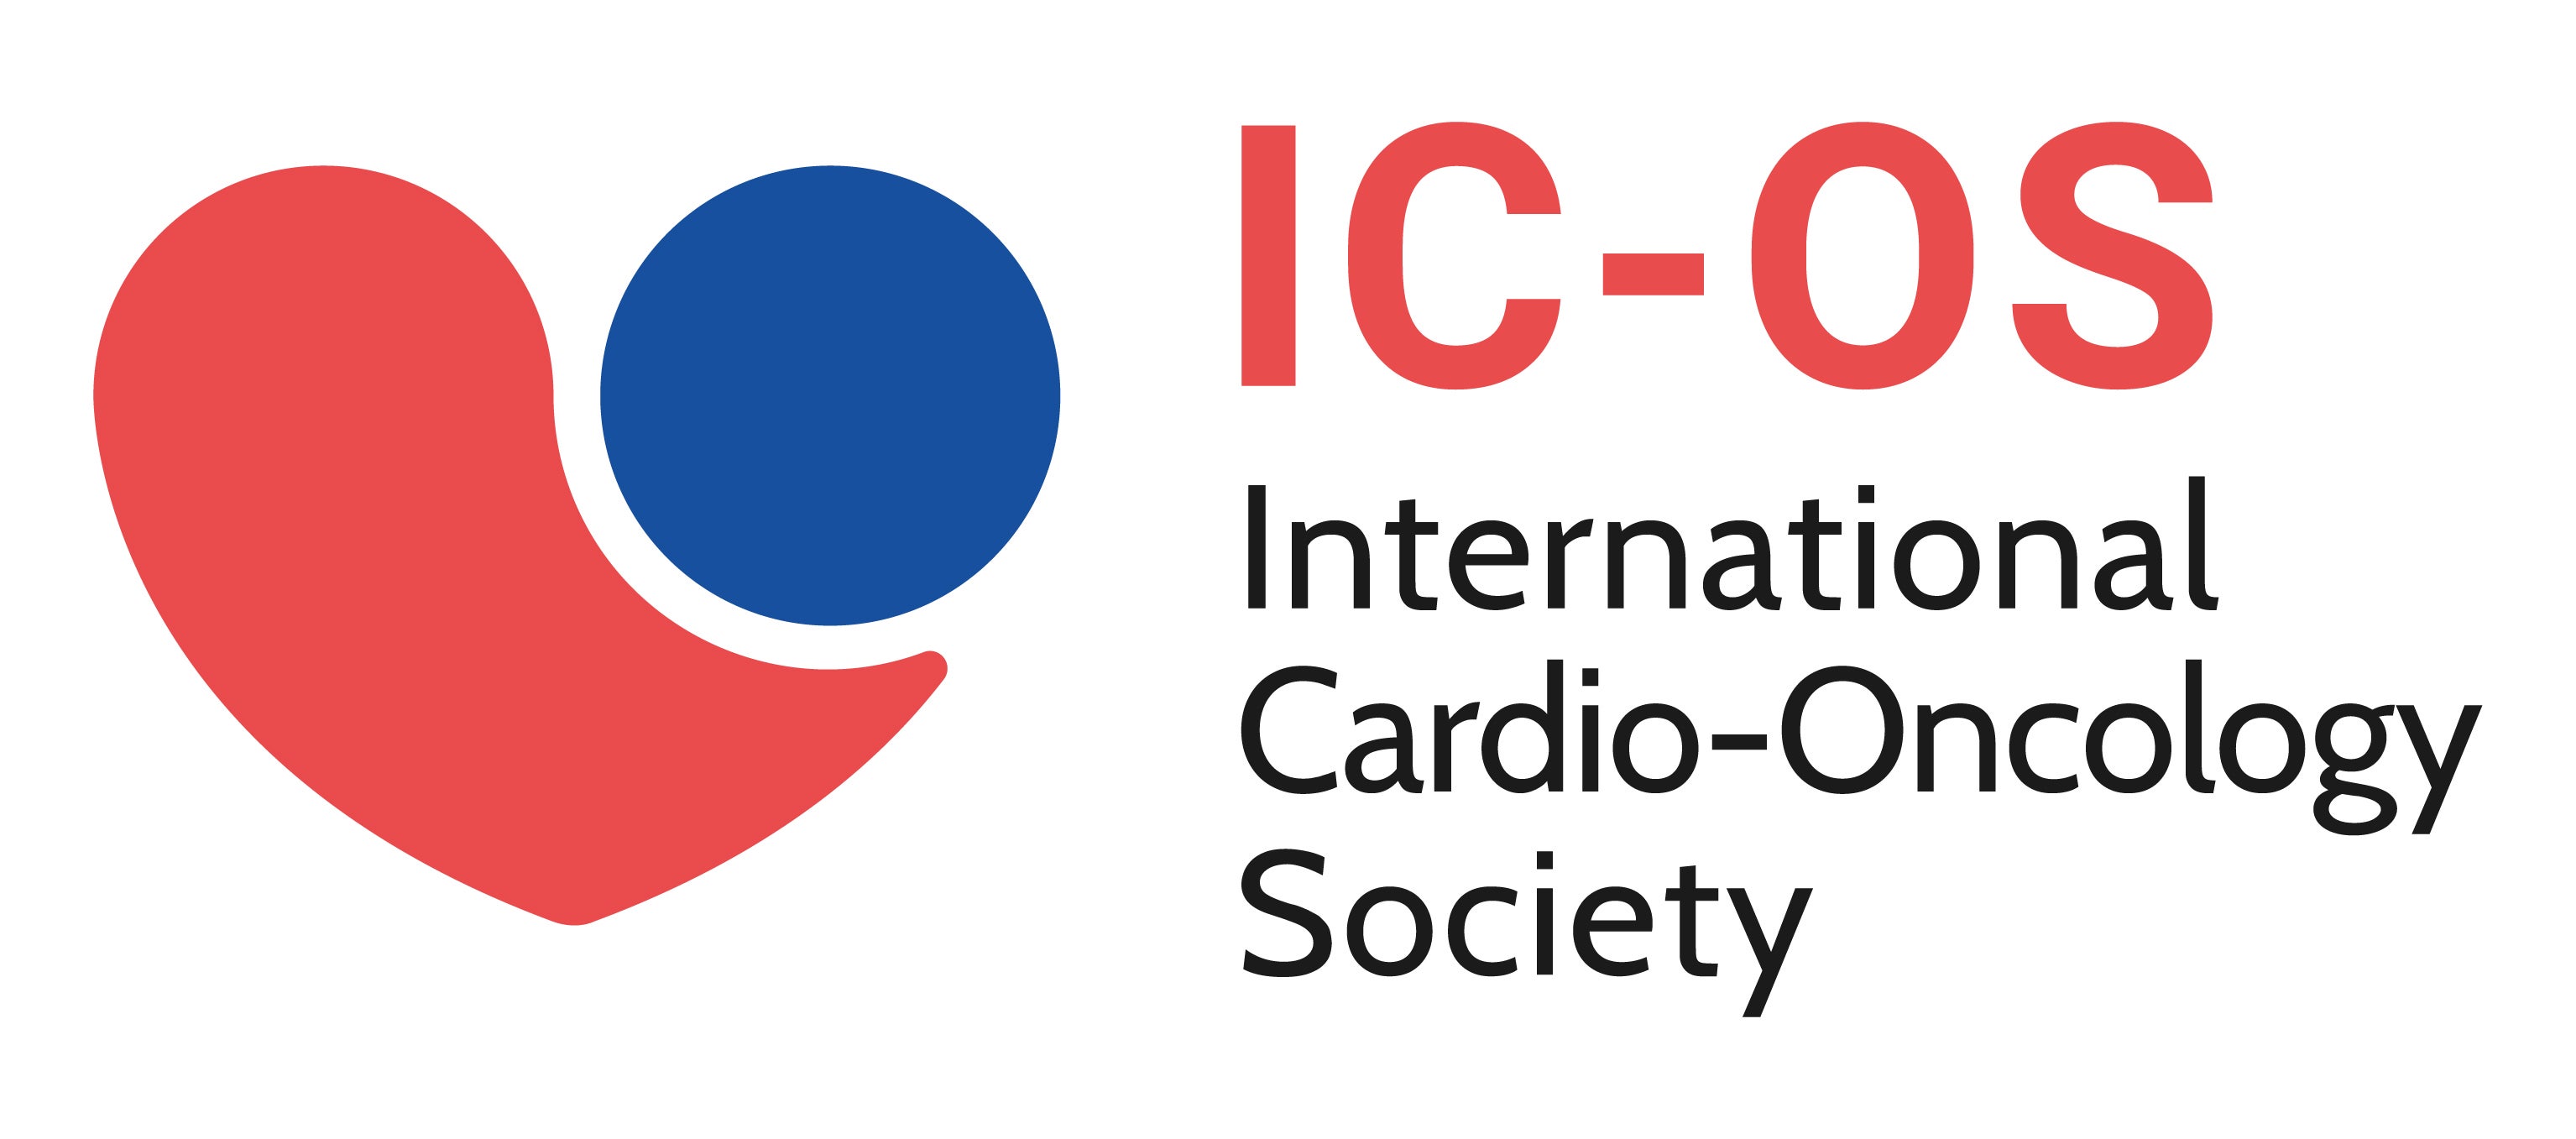 Centers of Excellence: Cardio-Oncology Presented by the International Cardio-Oncology Society (ICOS)